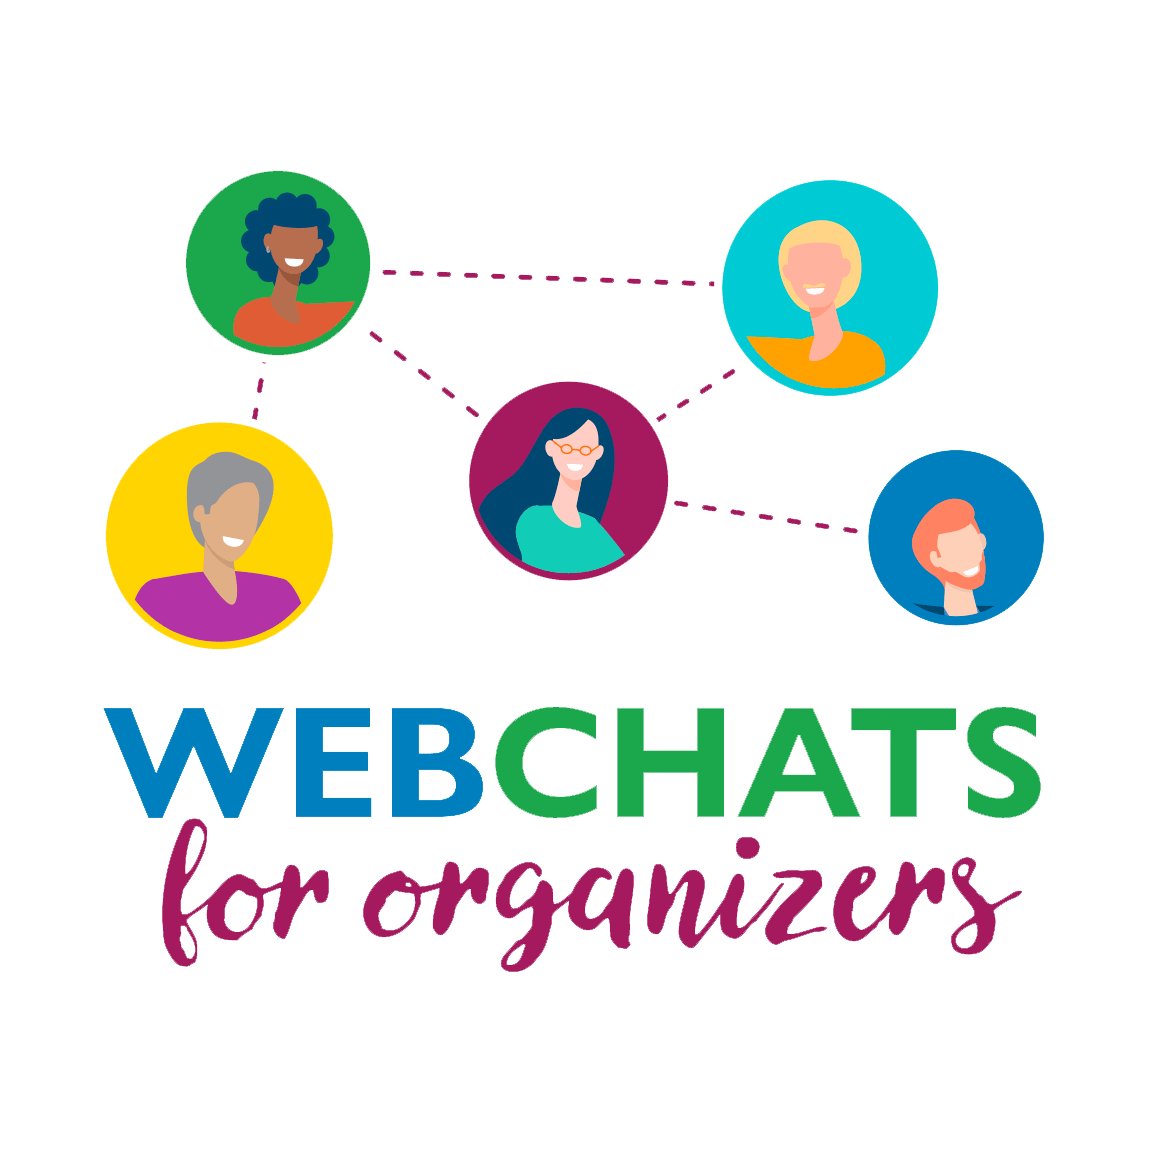 Register now for our next Web Chat